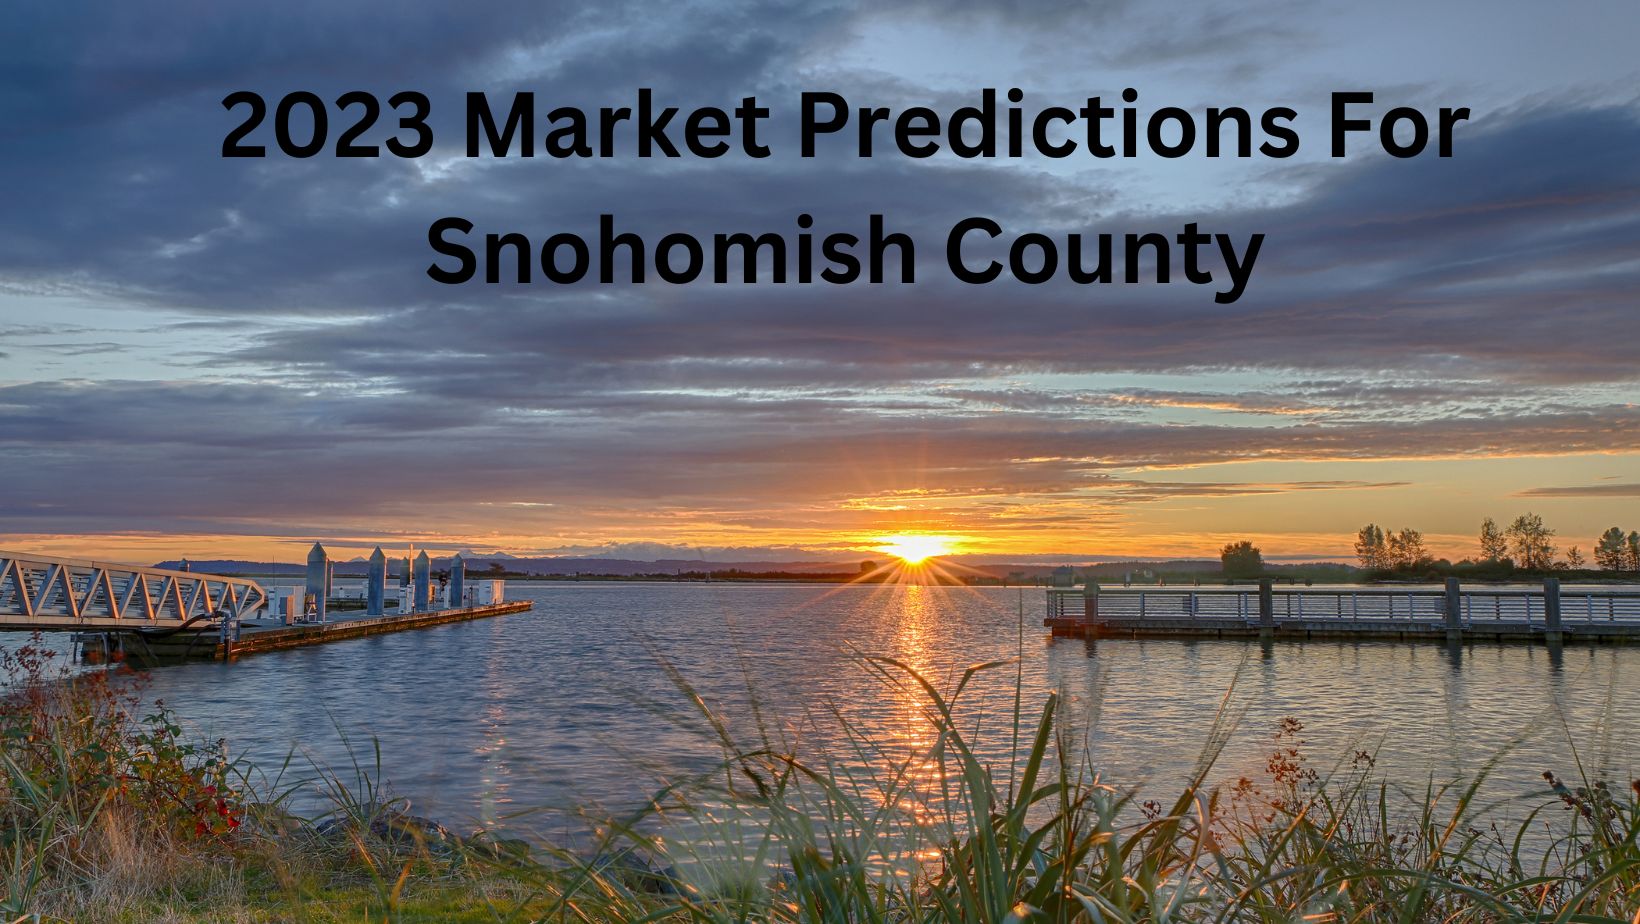 2023 Market Predictions For Snohomish County